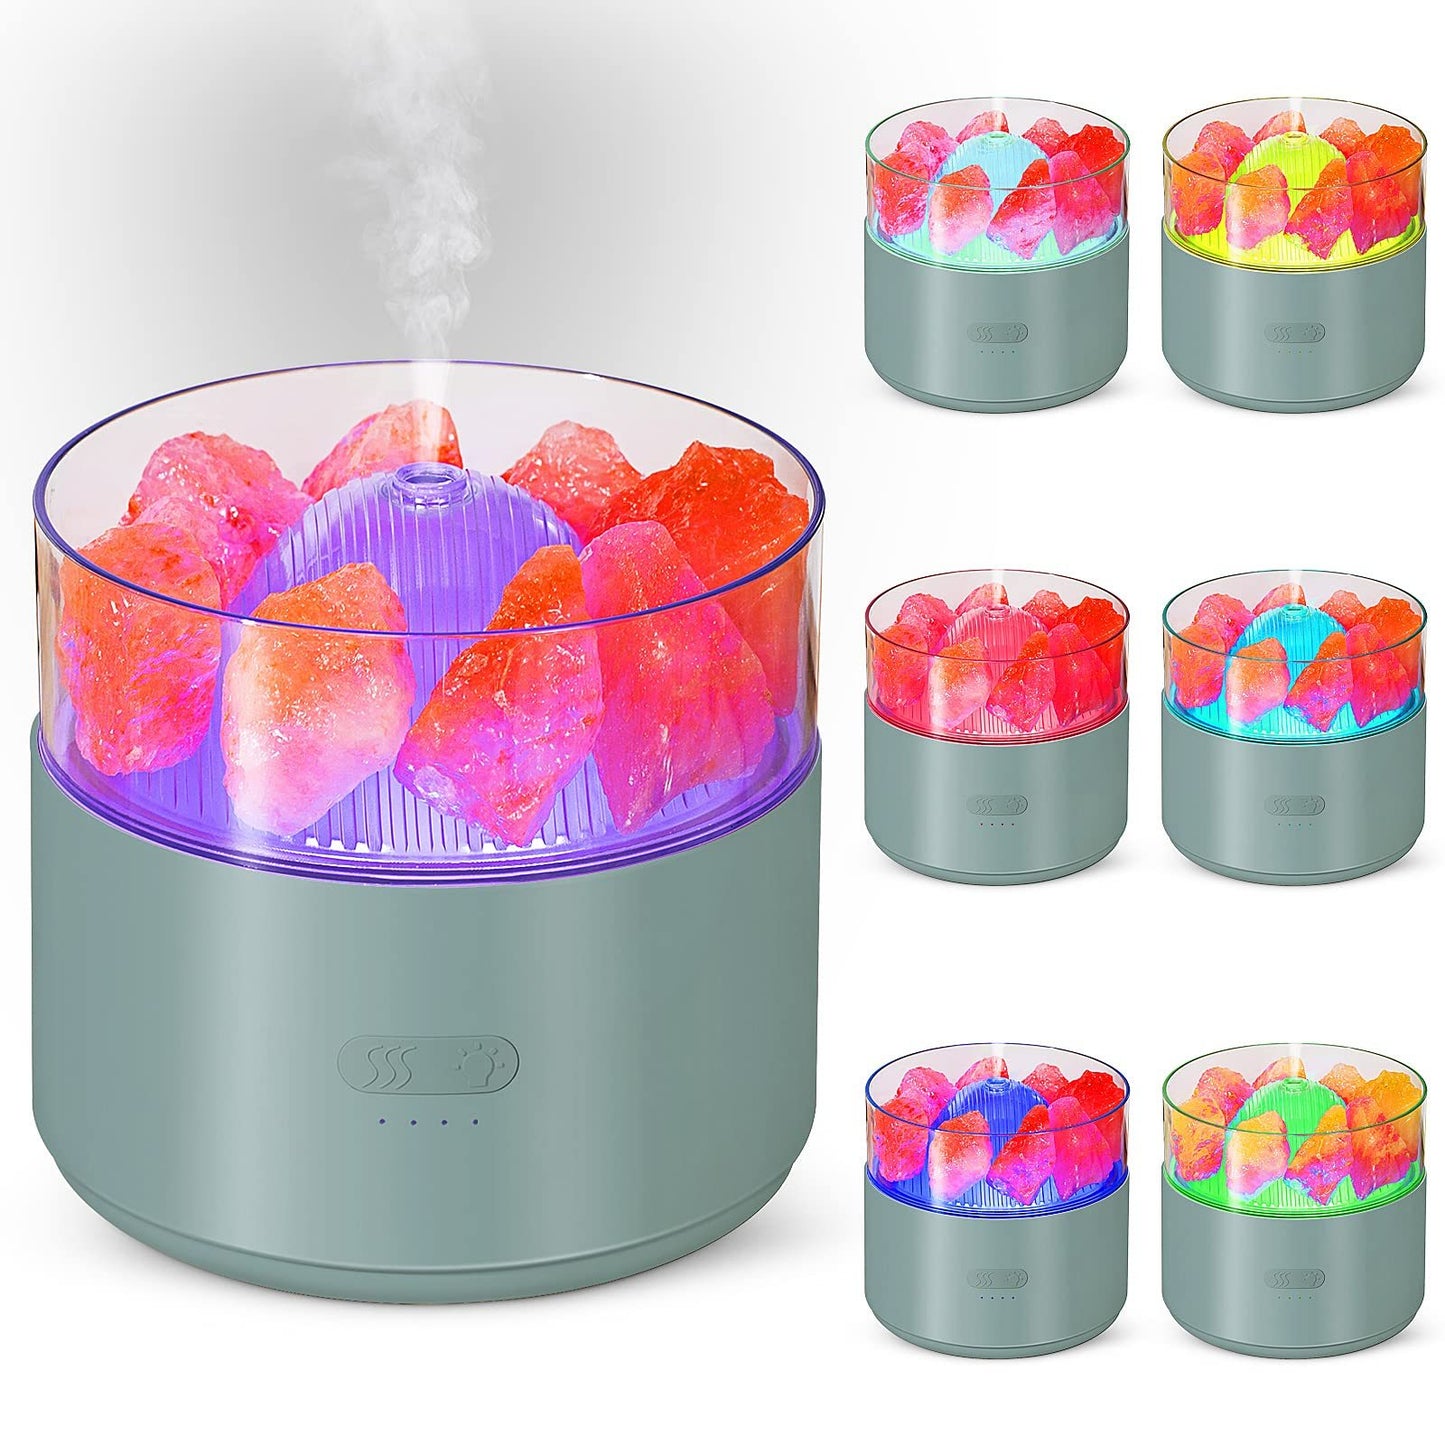 Cool-Mist Impeller Air Humidifier Crystal Salt Aroma Diffuser Incense Machine Fogger Essential Oil Lamp Difusor Ambient Light